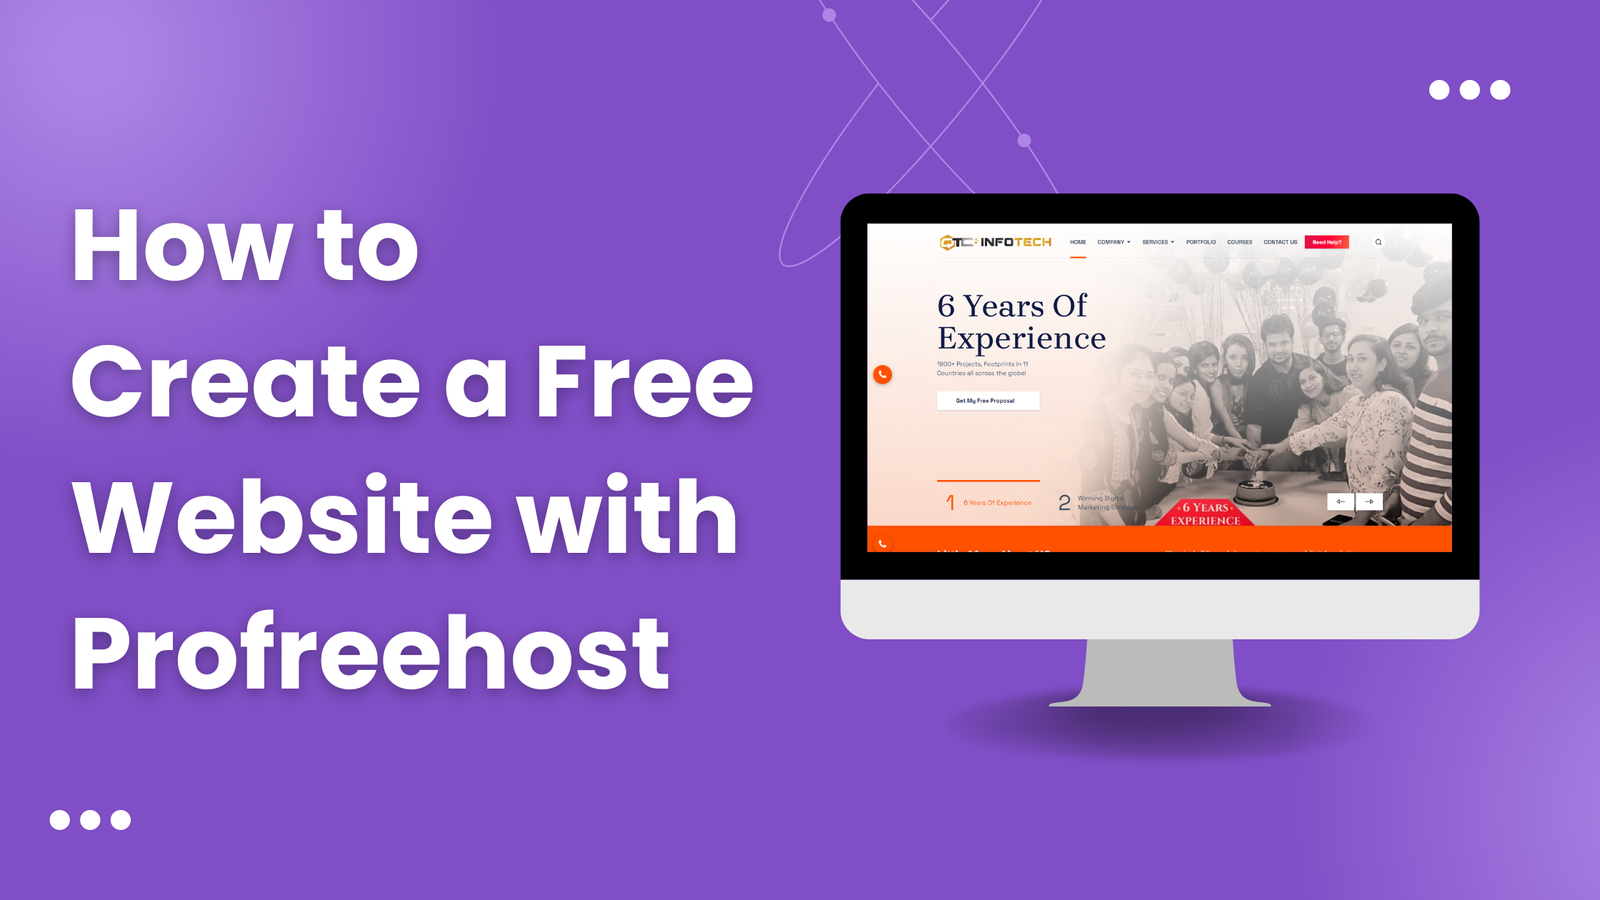 How to Create a Free Website with Profreehost - A Complete Guide